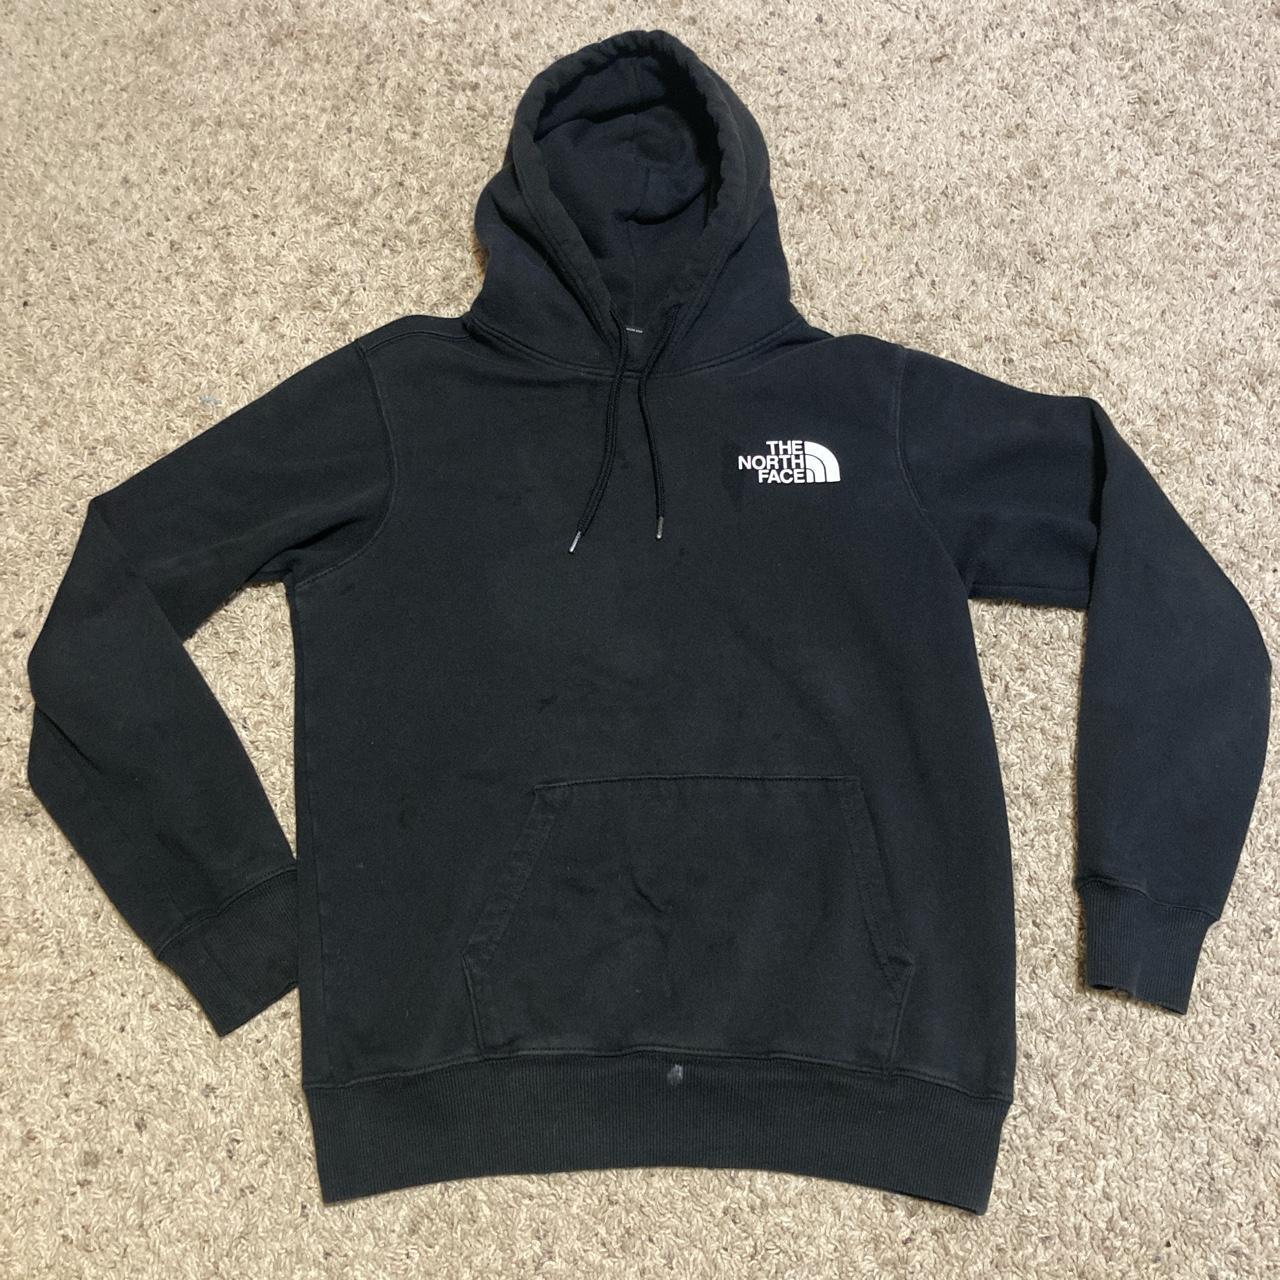 The North Face Men's Black Hoodie